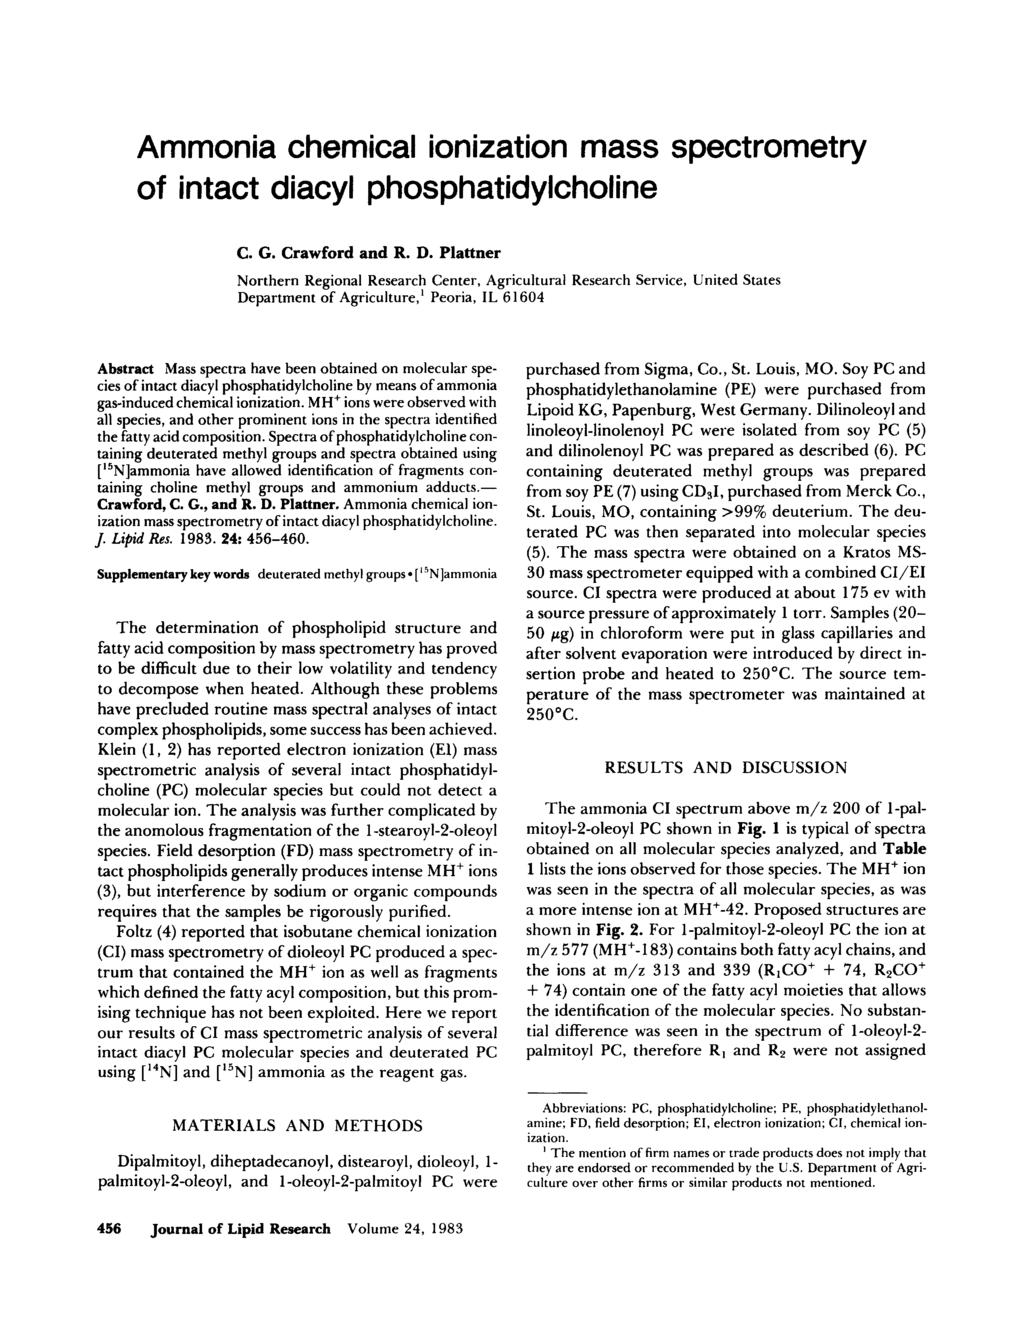 Ammonia chemical ionization mass spectrometry of intact diacyl phosphatidylcholine C. G. Crawford and R. D.